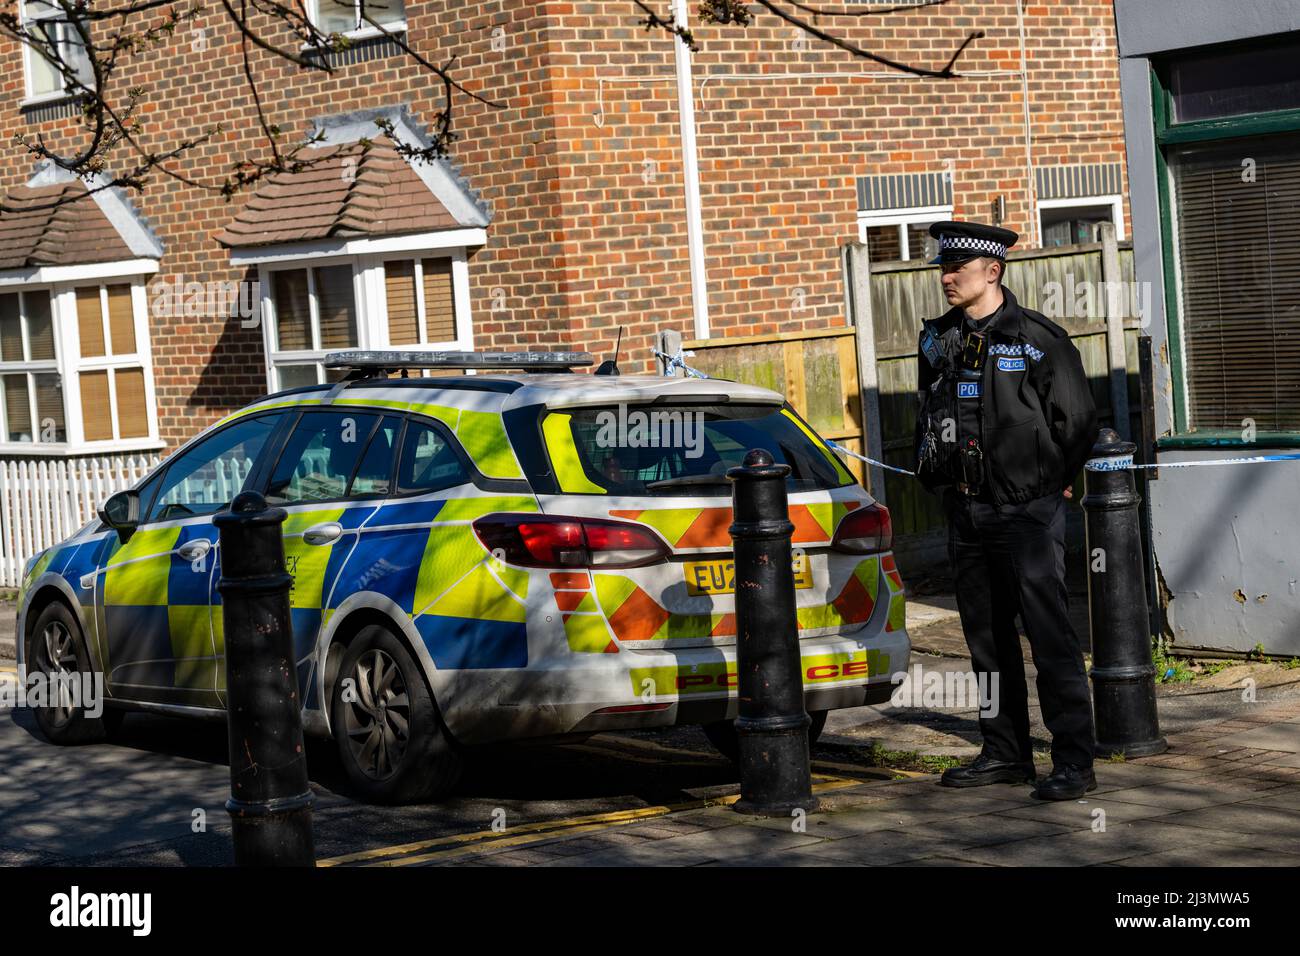 Brentwood, UK. 09th Apr, 2022. Brentwood Essex 9th Apl. 2022 Police remain guarding the scene of a murder in Brentwood. Essex police have today announced that Jevegenijs Lapkovskis, 36, of Warley Hill, in Brentwood, has been charged with murder and is due to appear in Chelmsford Magistrates' Court this morning. He has been charged with the murder of Lee Murrell, 29. on Tuesday. Credit: Ian Davidson/Alamy Live News Stock Photo